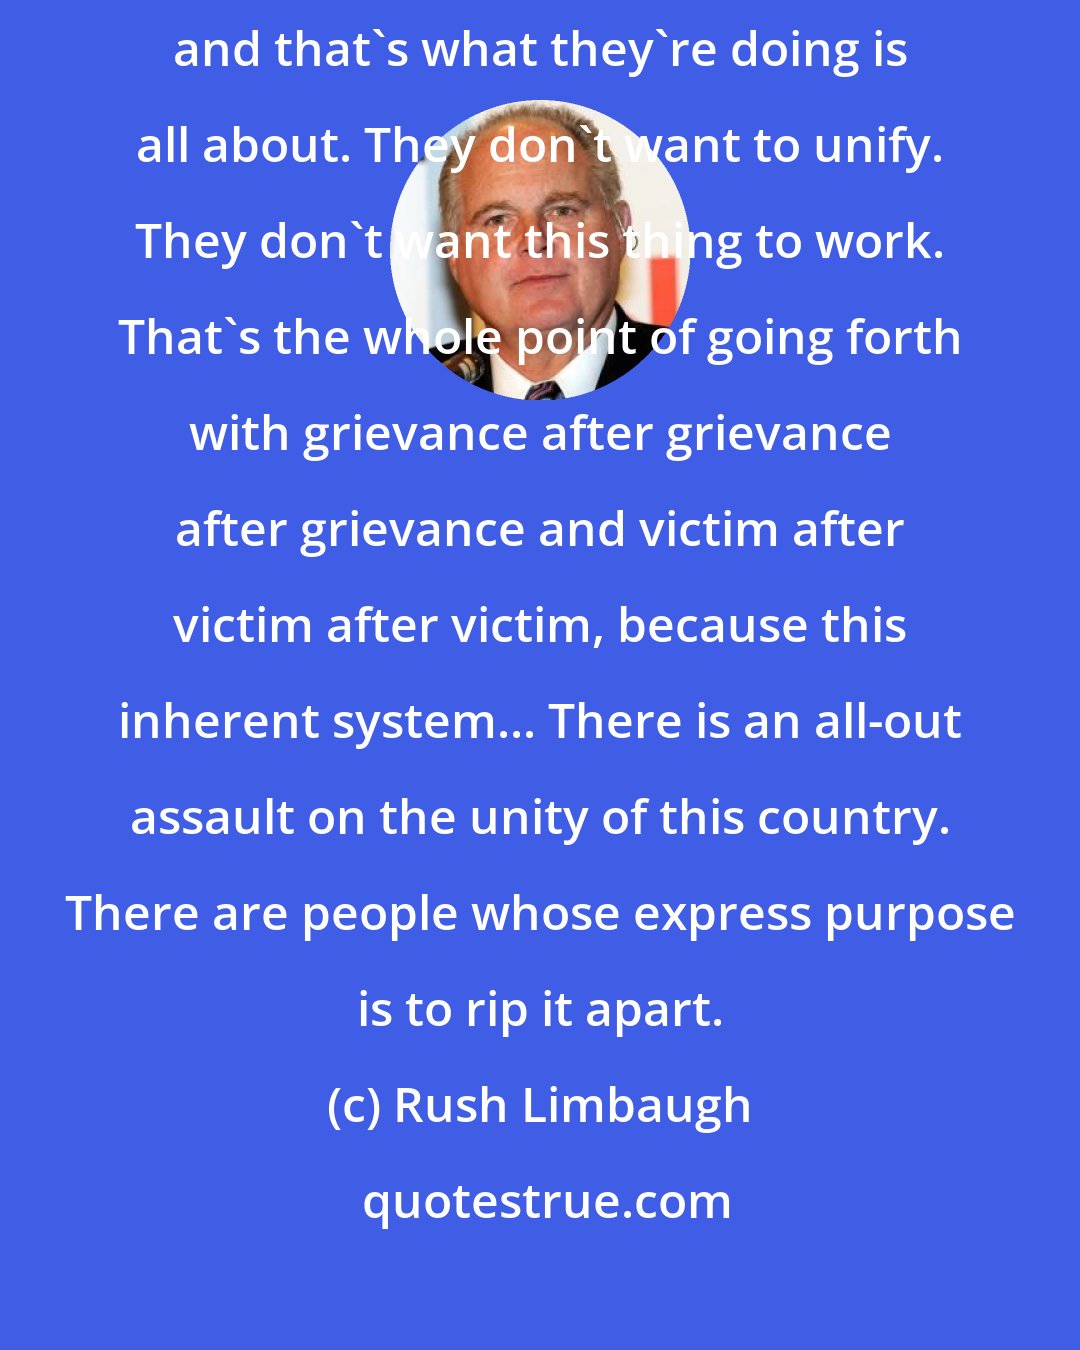 Rush Limbaugh: There are some people who do not want this thing to continue to work, and that's what they're doing is all about. They don't want to unify. They don't want this thing to work. That's the whole point of going forth with grievance after grievance after grievance and victim after victim after victim, because this inherent system... There is an all-out assault on the unity of this country. There are people whose express purpose is to rip it apart.